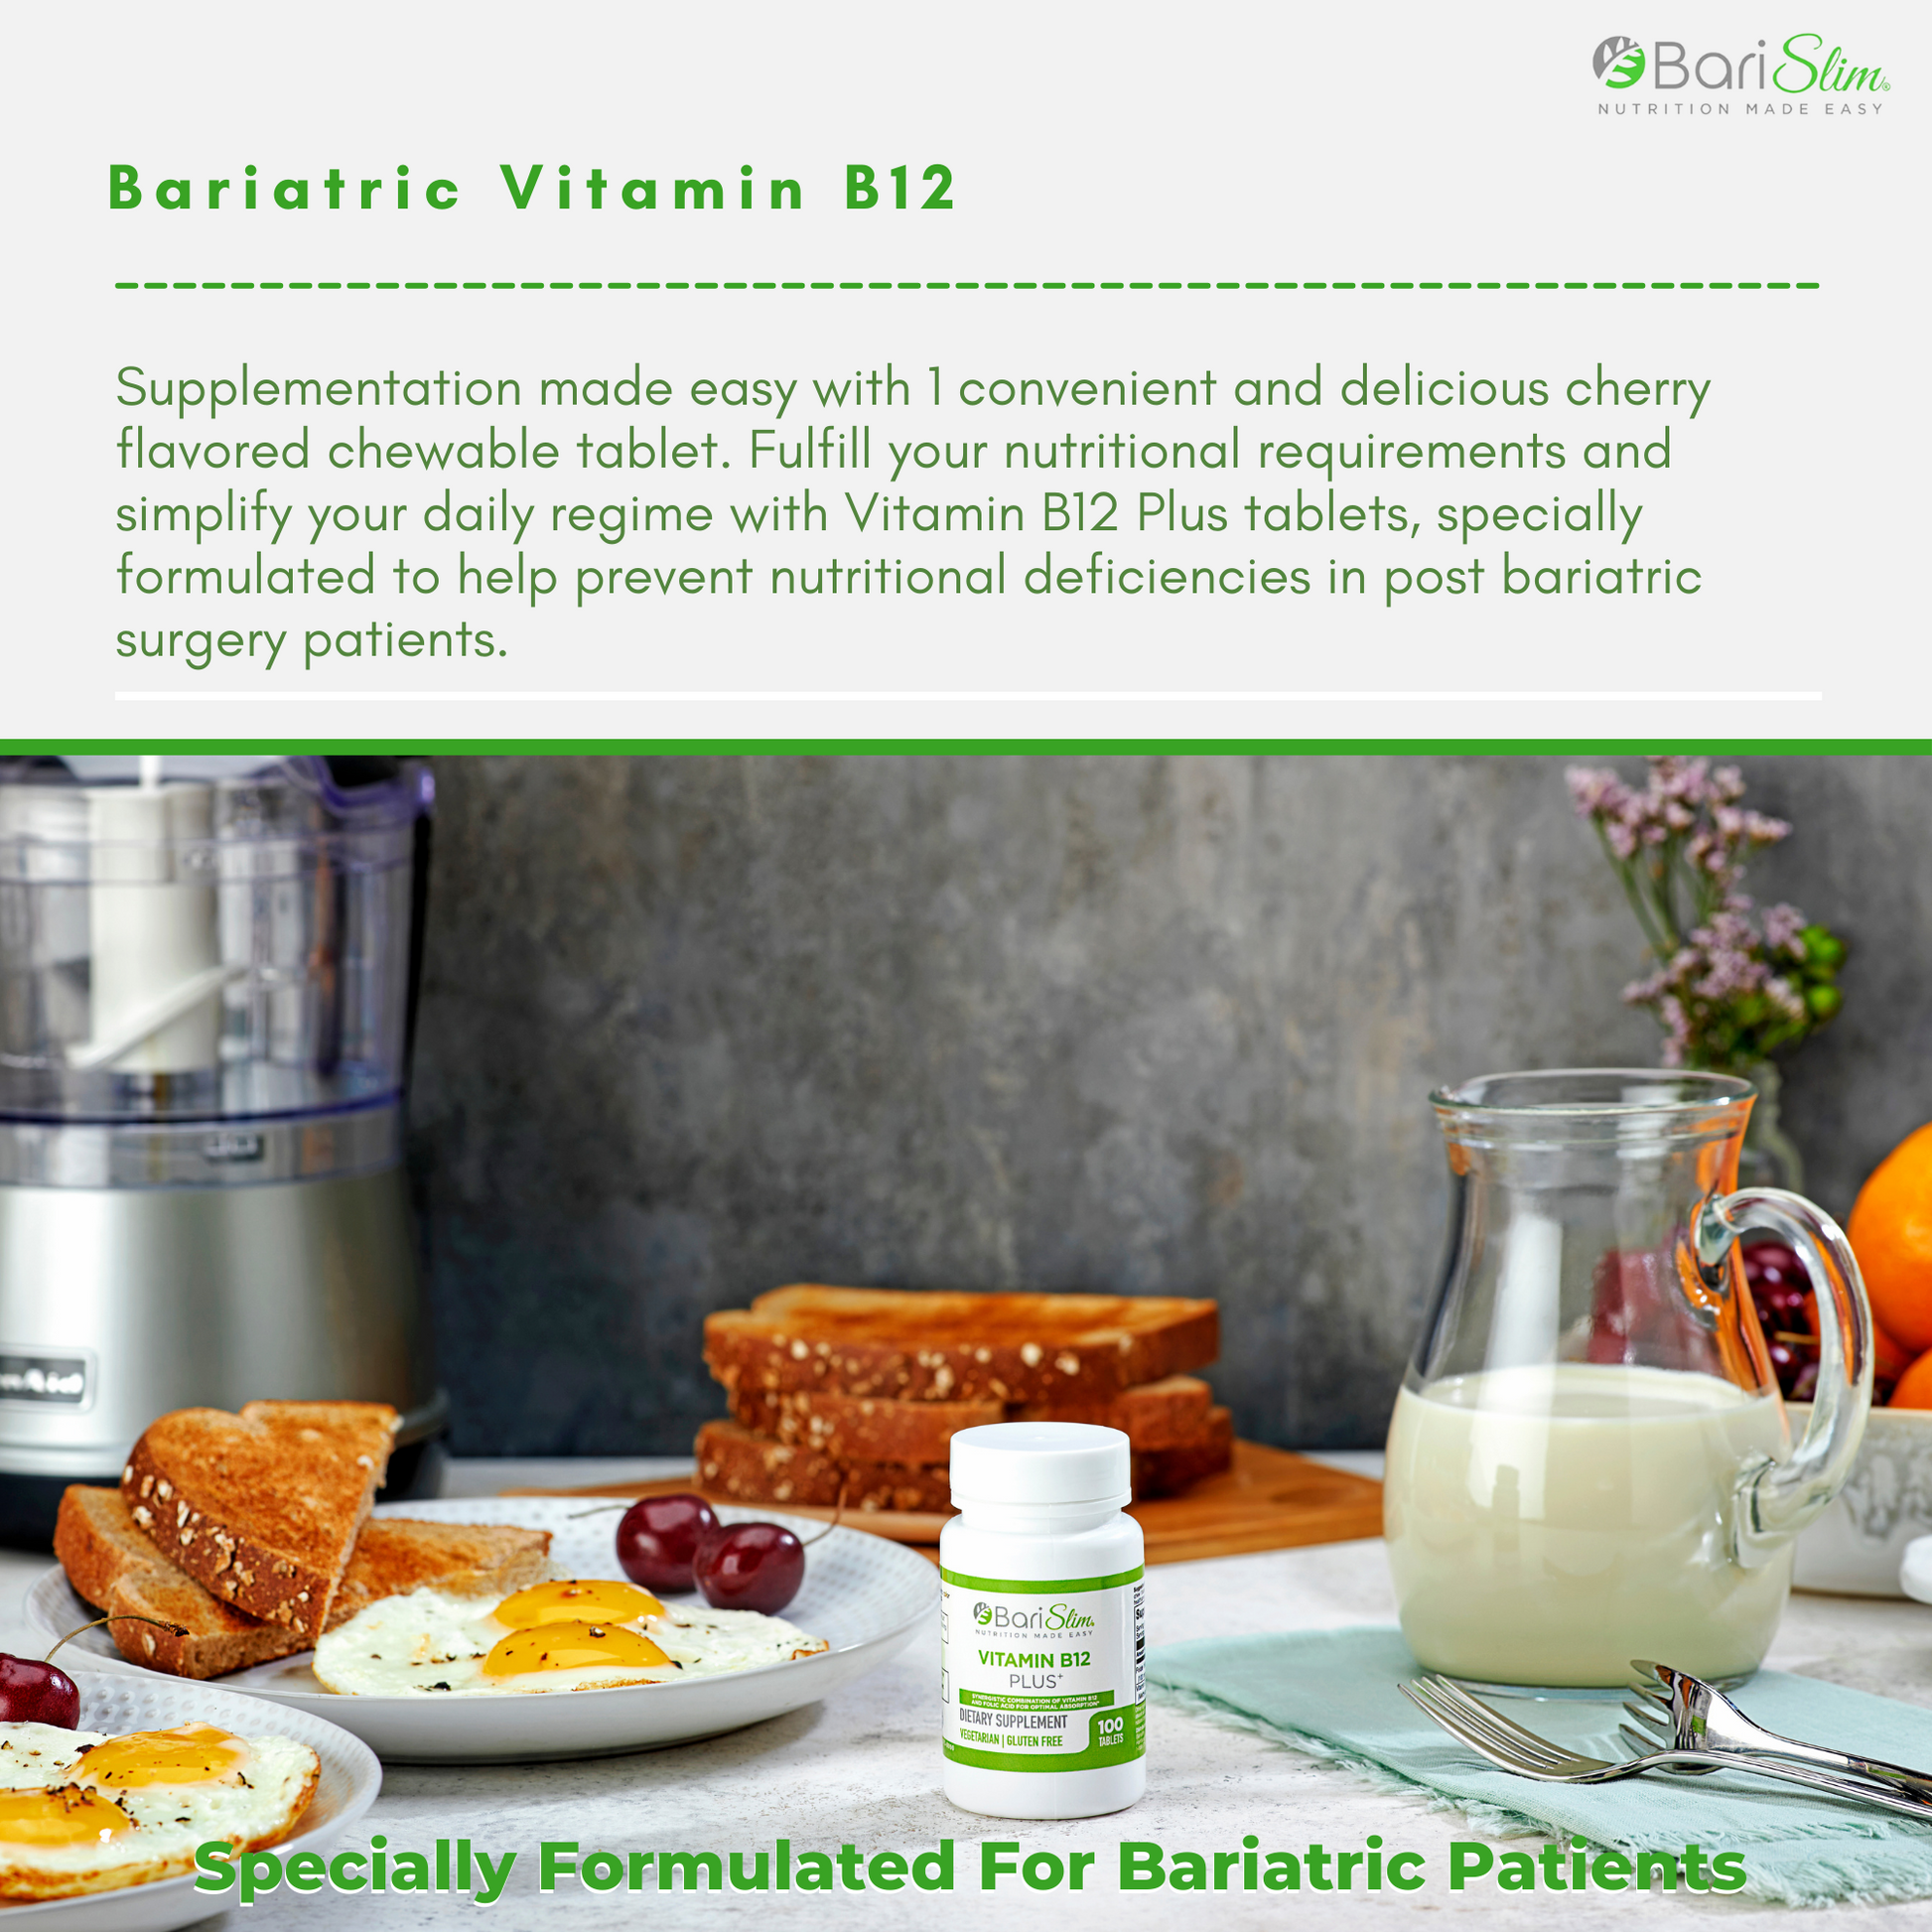 Bariatric Vitamin B12 plus tablets for bariatric patients